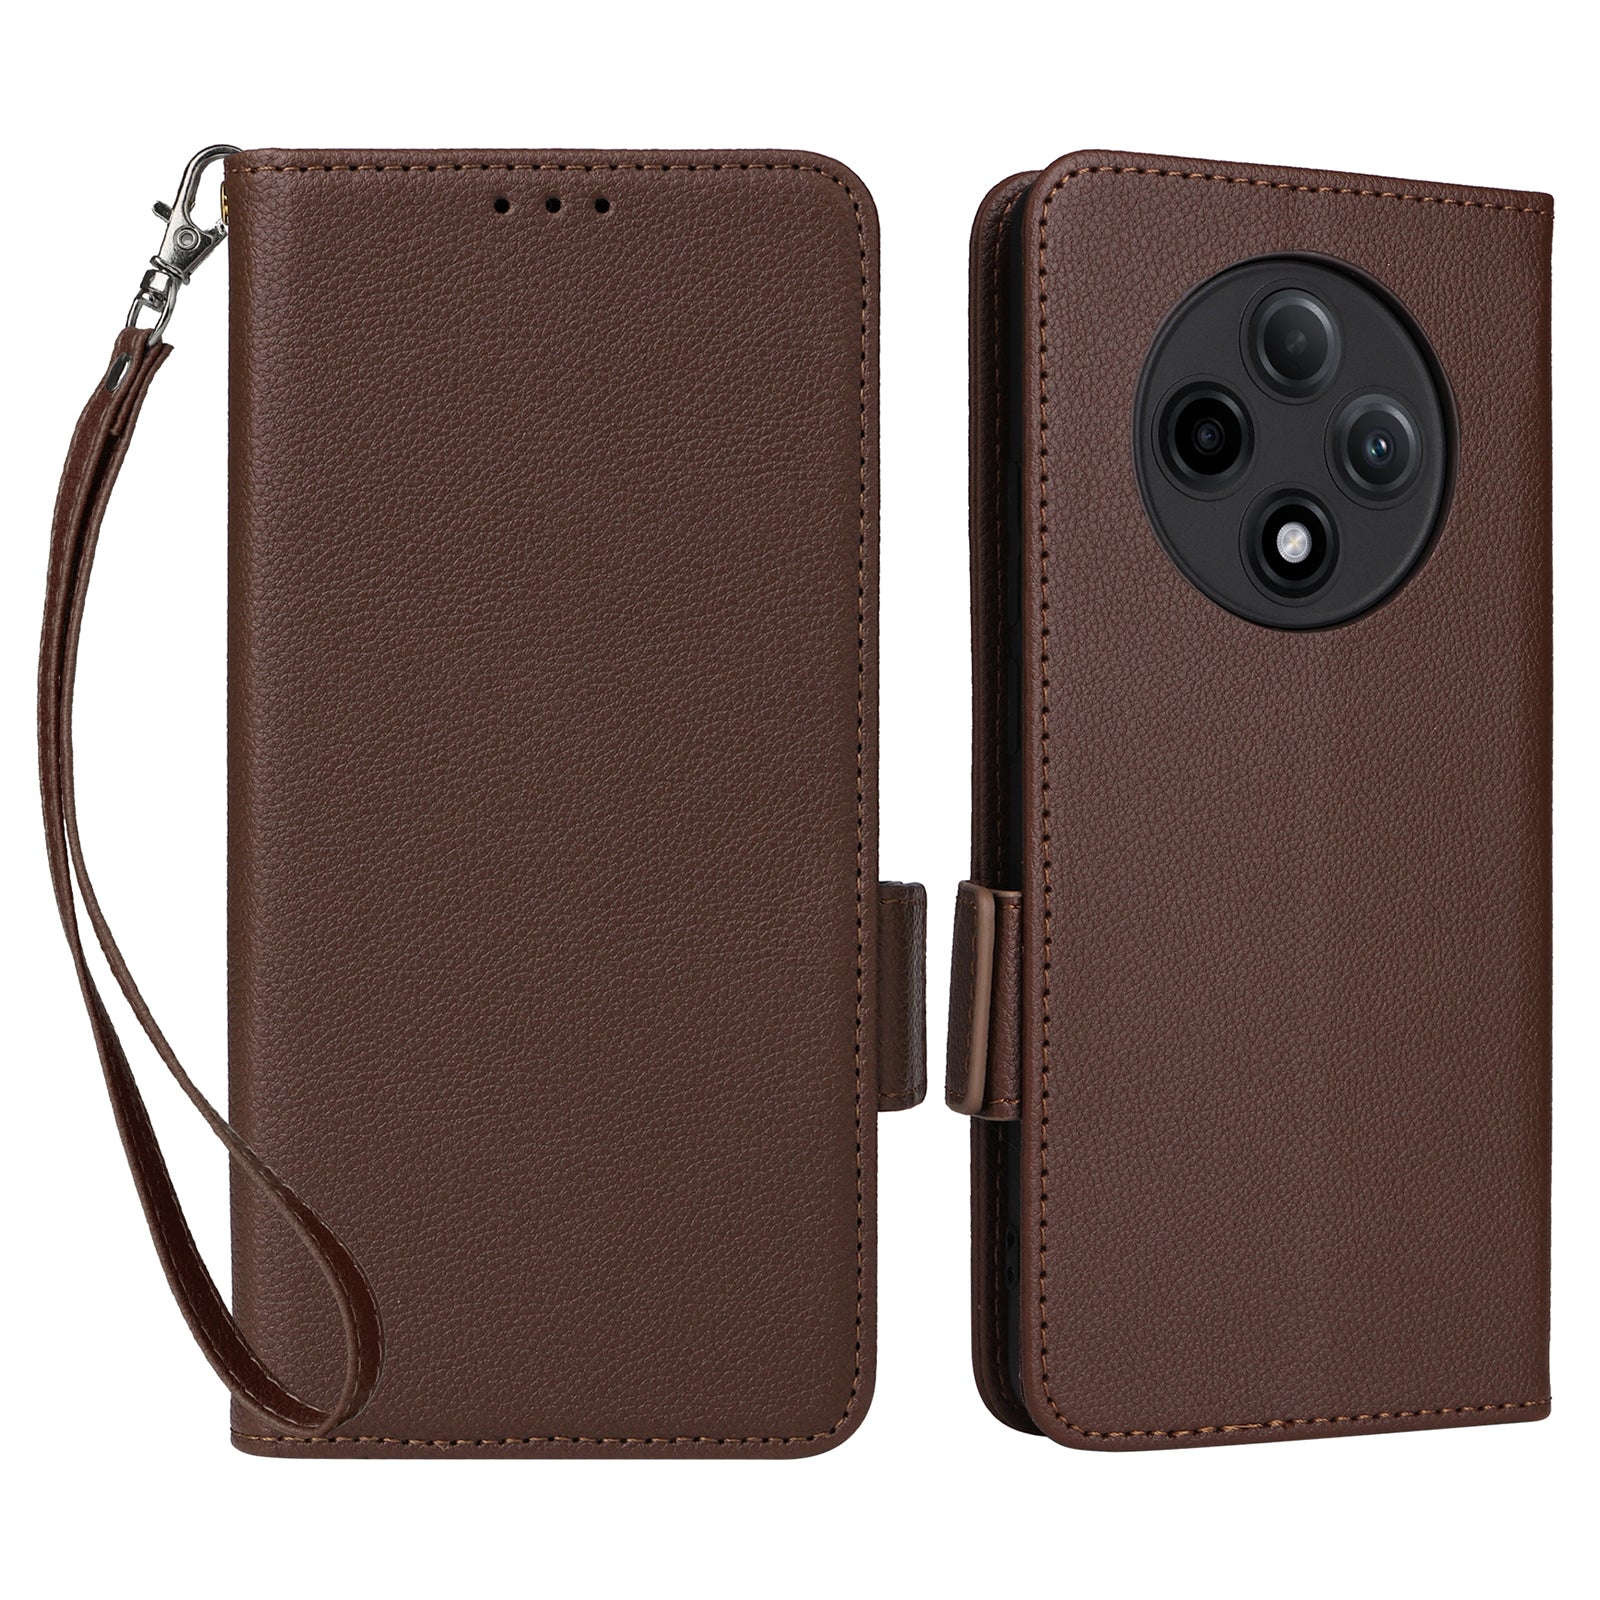 For Oppo A3 Pro 5G Case Leather Phone Cover Mobile Accessories Wholesale Supplier - Brown